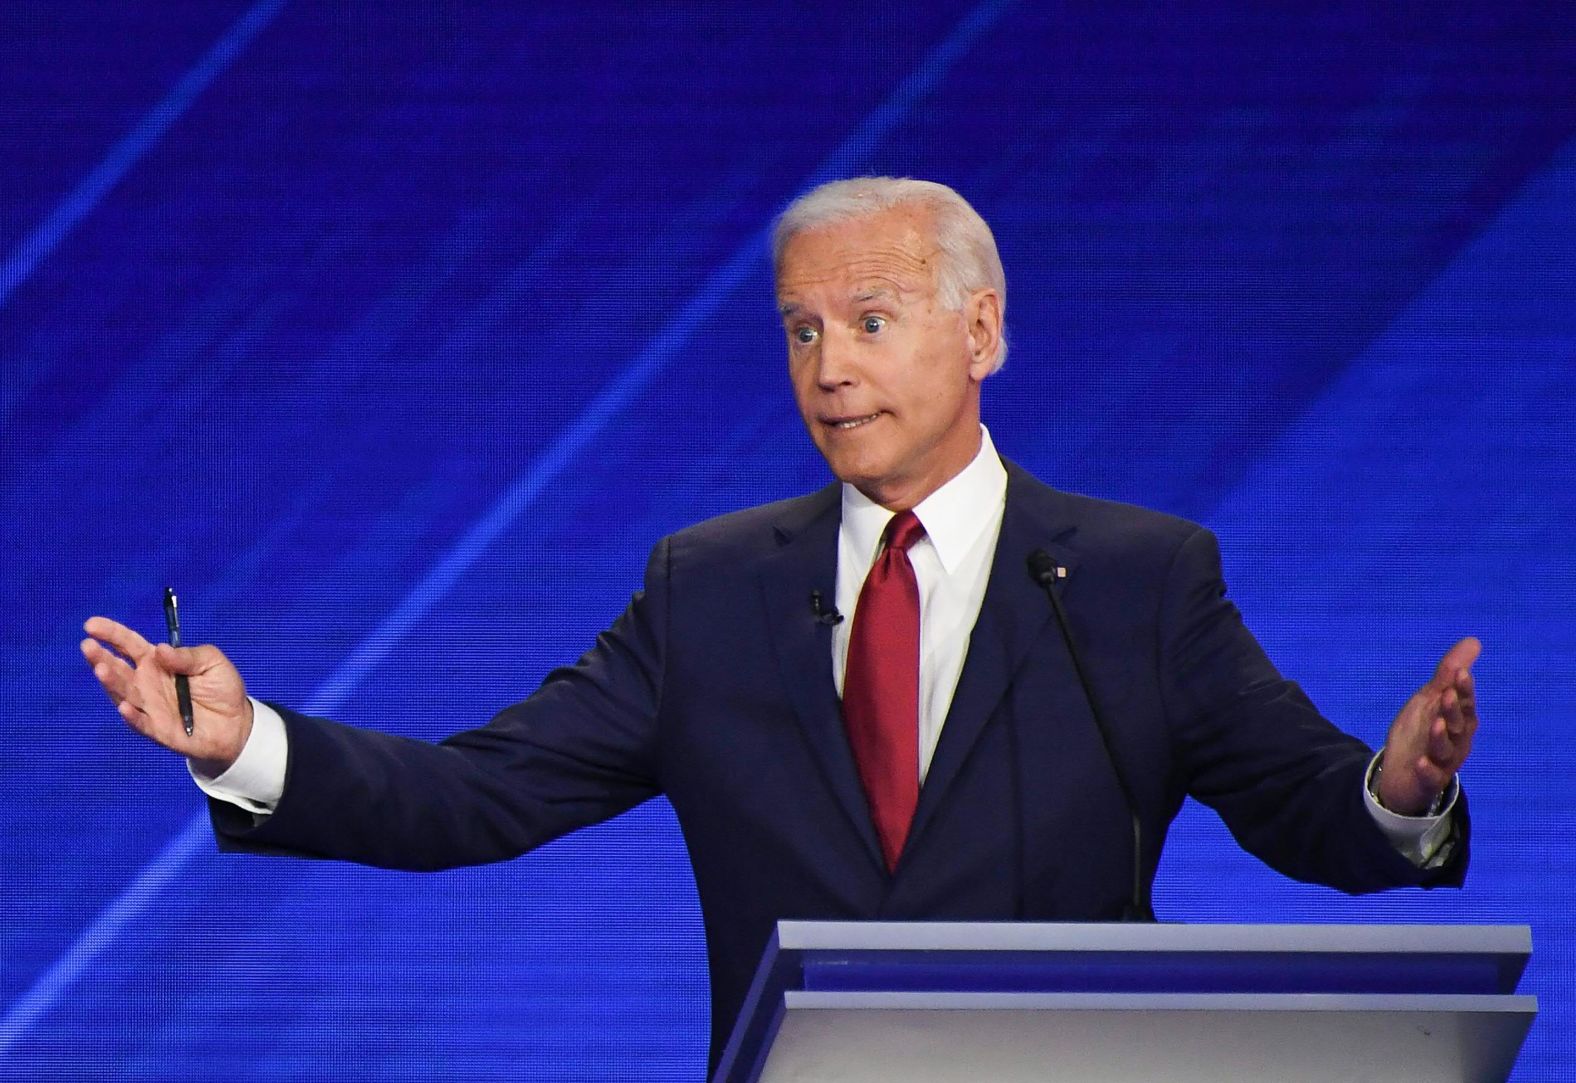 <a href="https://www.cnn.com/politics/live-news/democratic-debate-september-2019/h_ae8f2d4d8000d375ff47dd15bc5d89e6" target="_blank">Biden has linked himself to former President Barack Obama</a> on multiple fronts, including health care. "I think that Obamacare worked," Biden said, before attacking "Medicare for All" for being too expensive. "How are we going to pay for it? I want to hear that tonight."